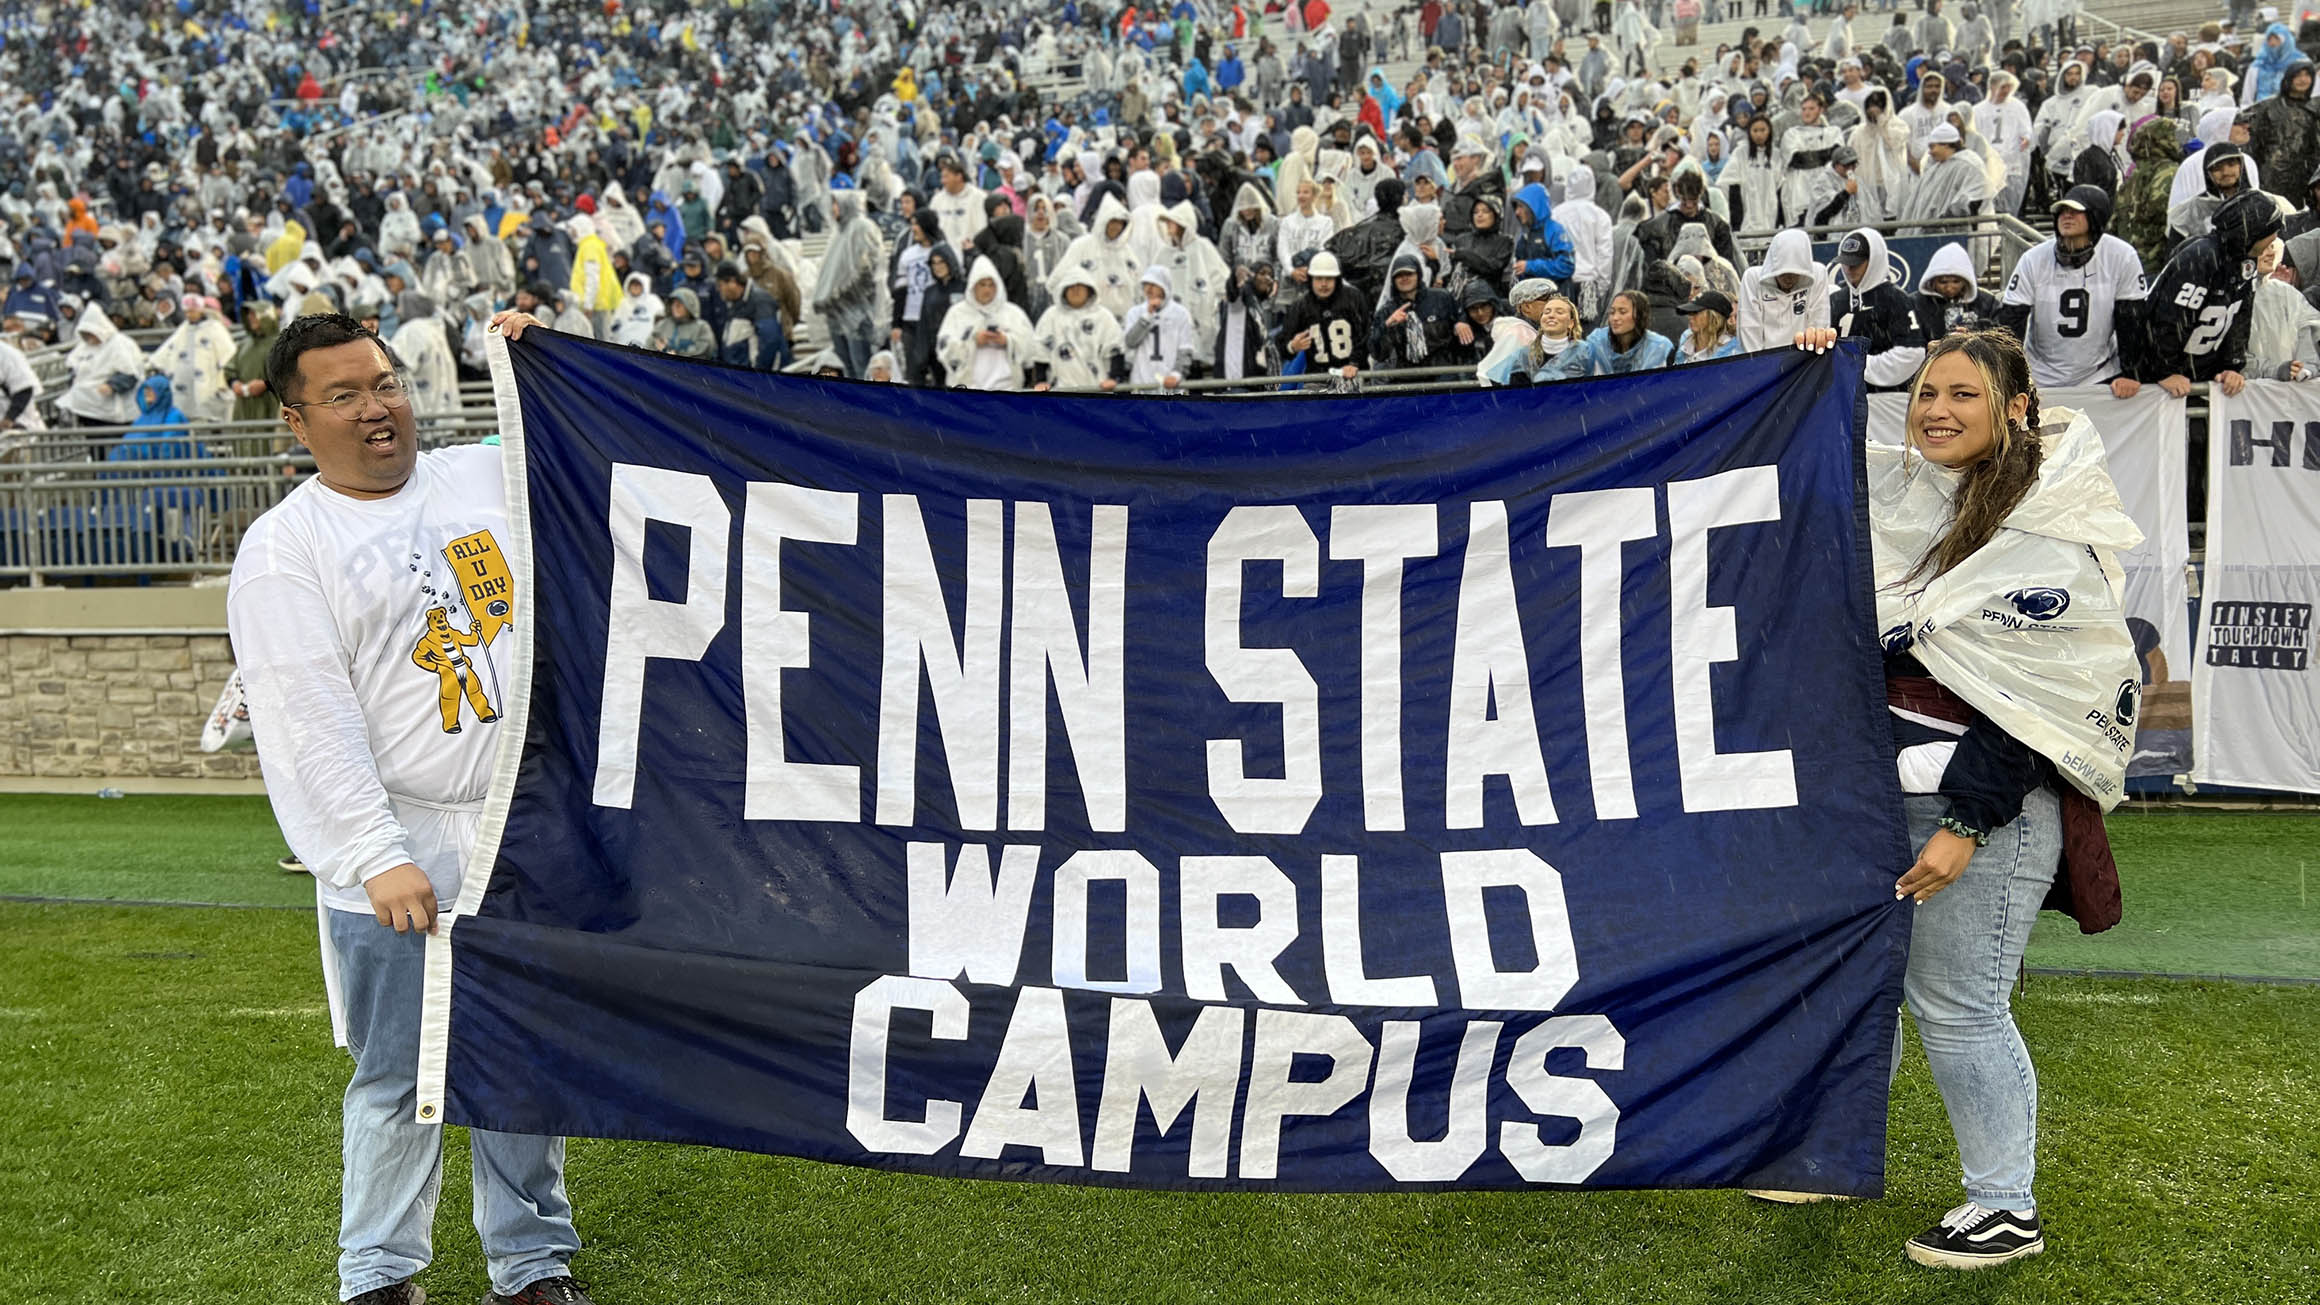 MacArthur Engstrand and Mattea Derr hold the Penn State World Campus banner on the field of Beaver Stadium.